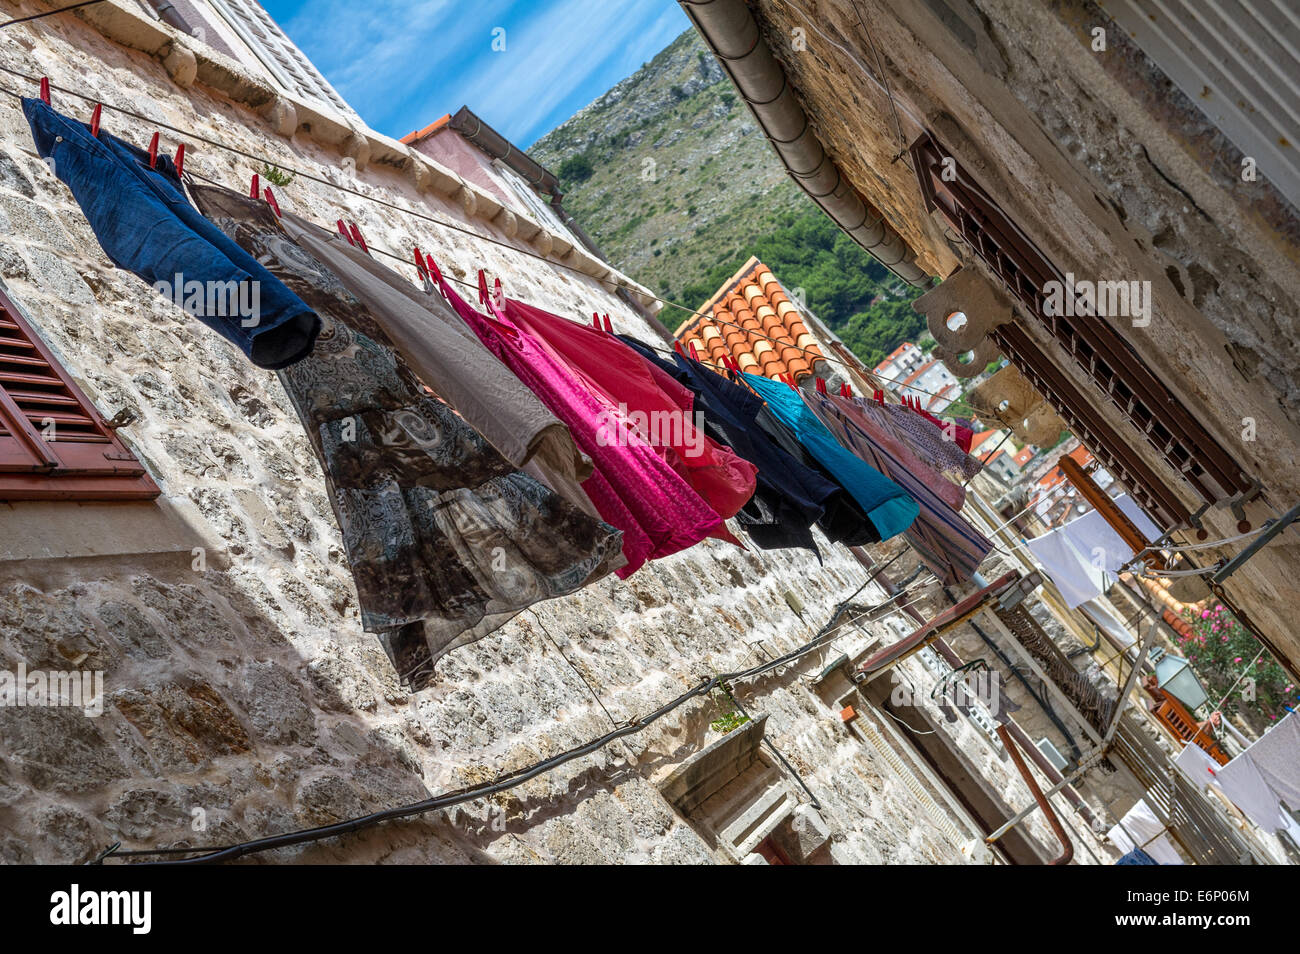 Washing hanging to dry in a side street in the old town of Dubrovnik. Stock Photo